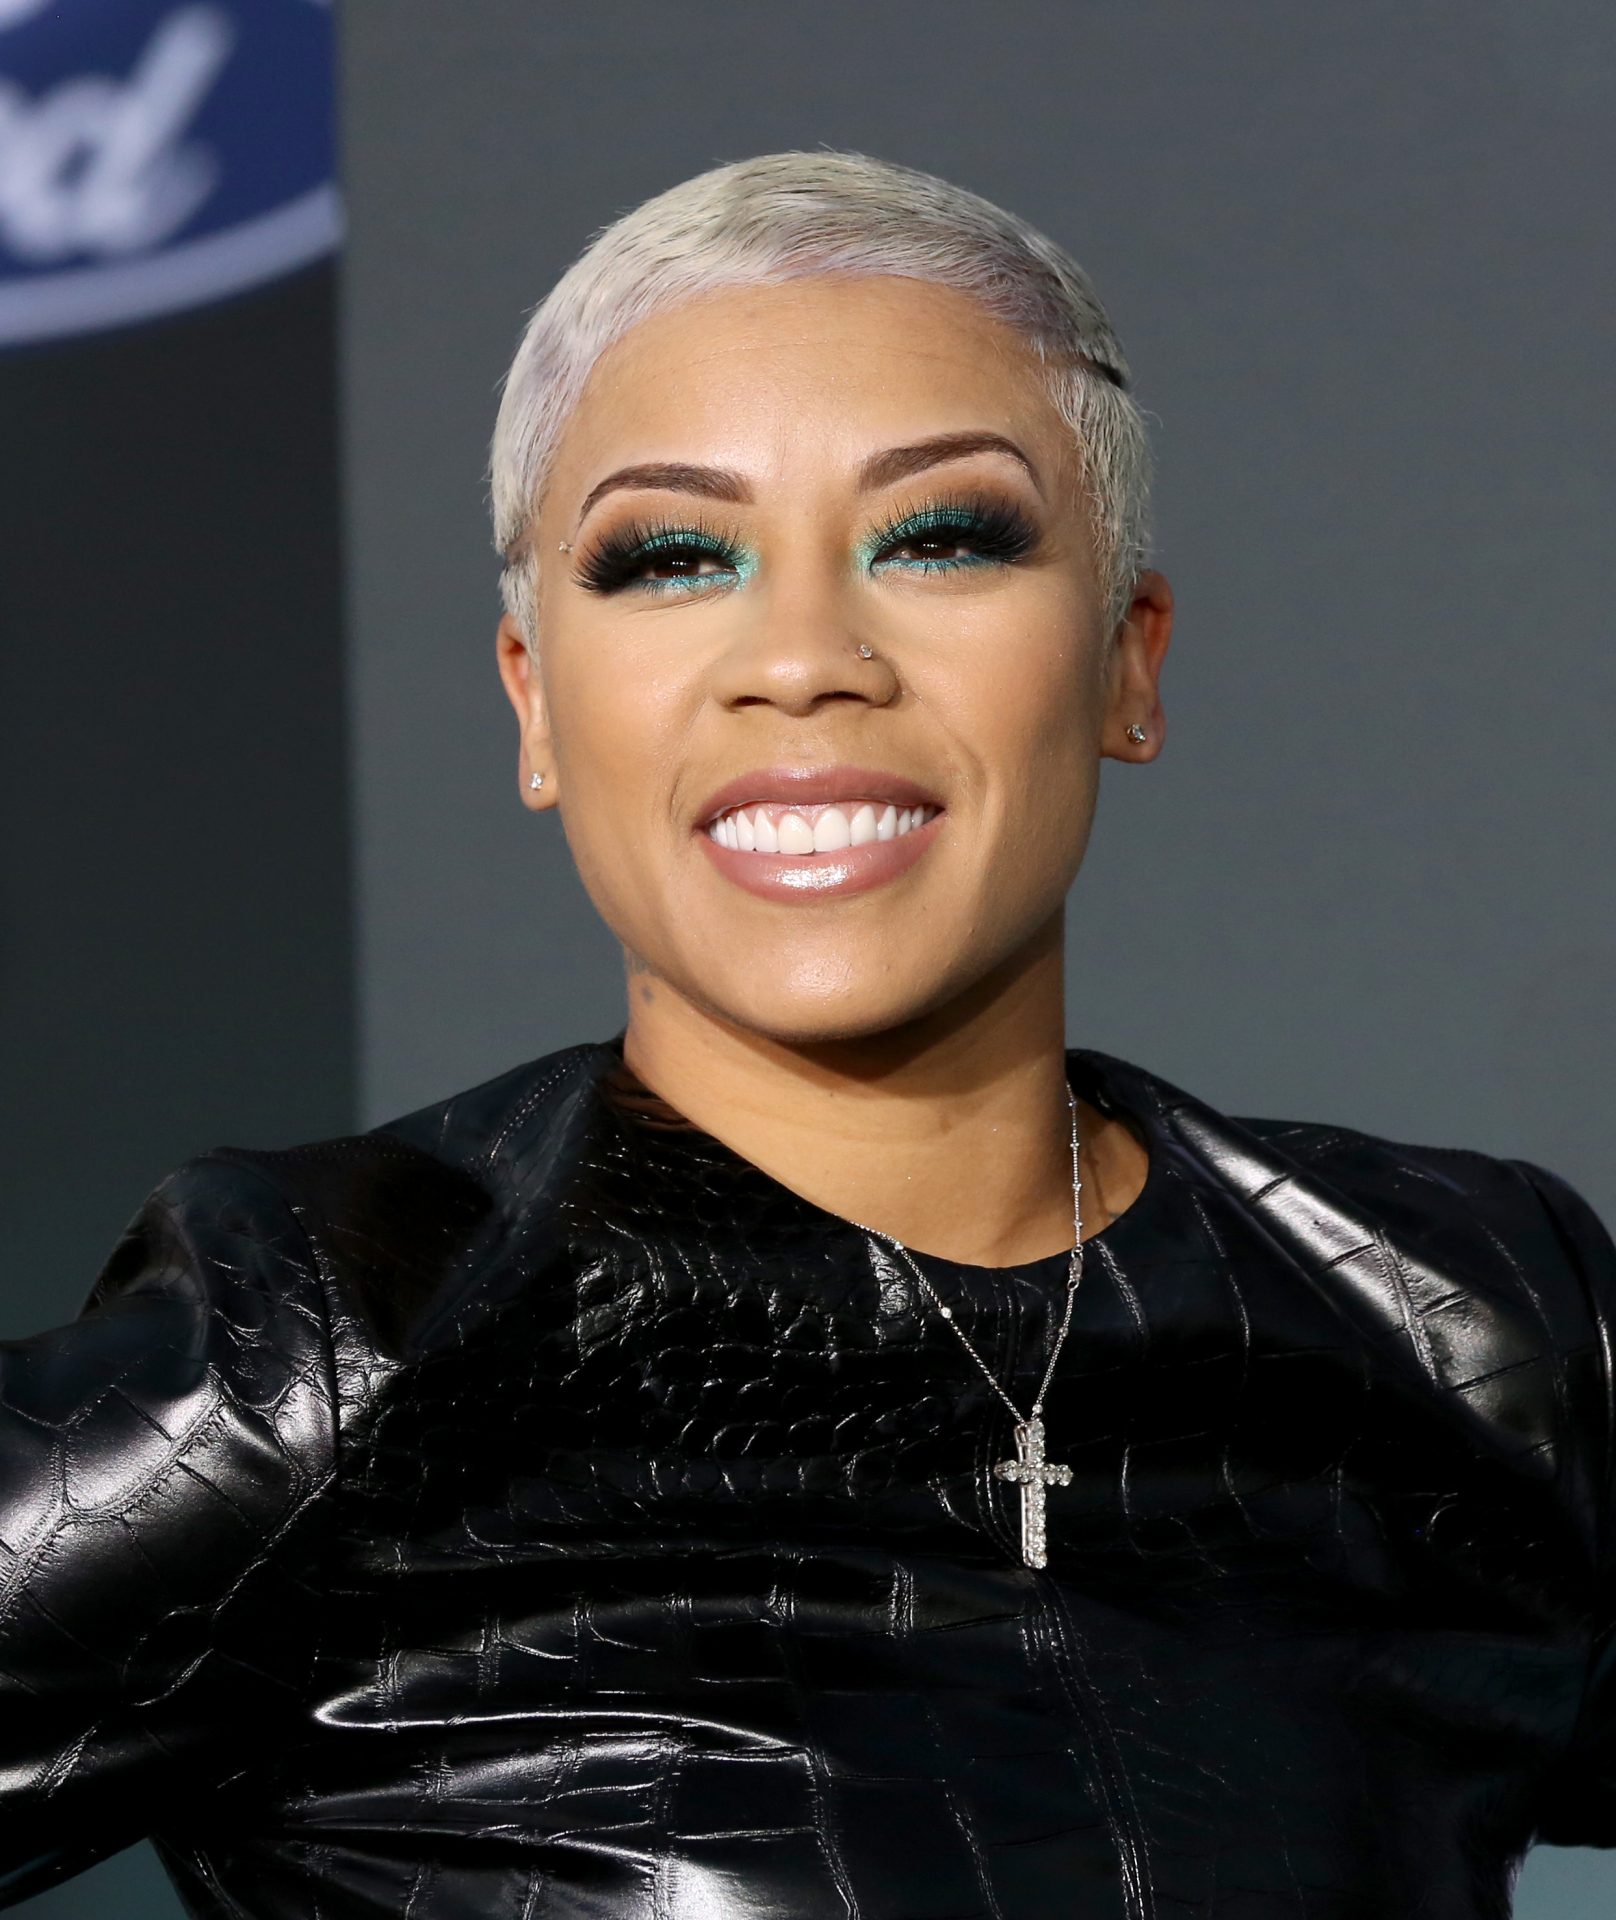 (Exclusive) Keyshia Cole Shares She Brought Back The Gap For Her Role In Upcoming Biopic